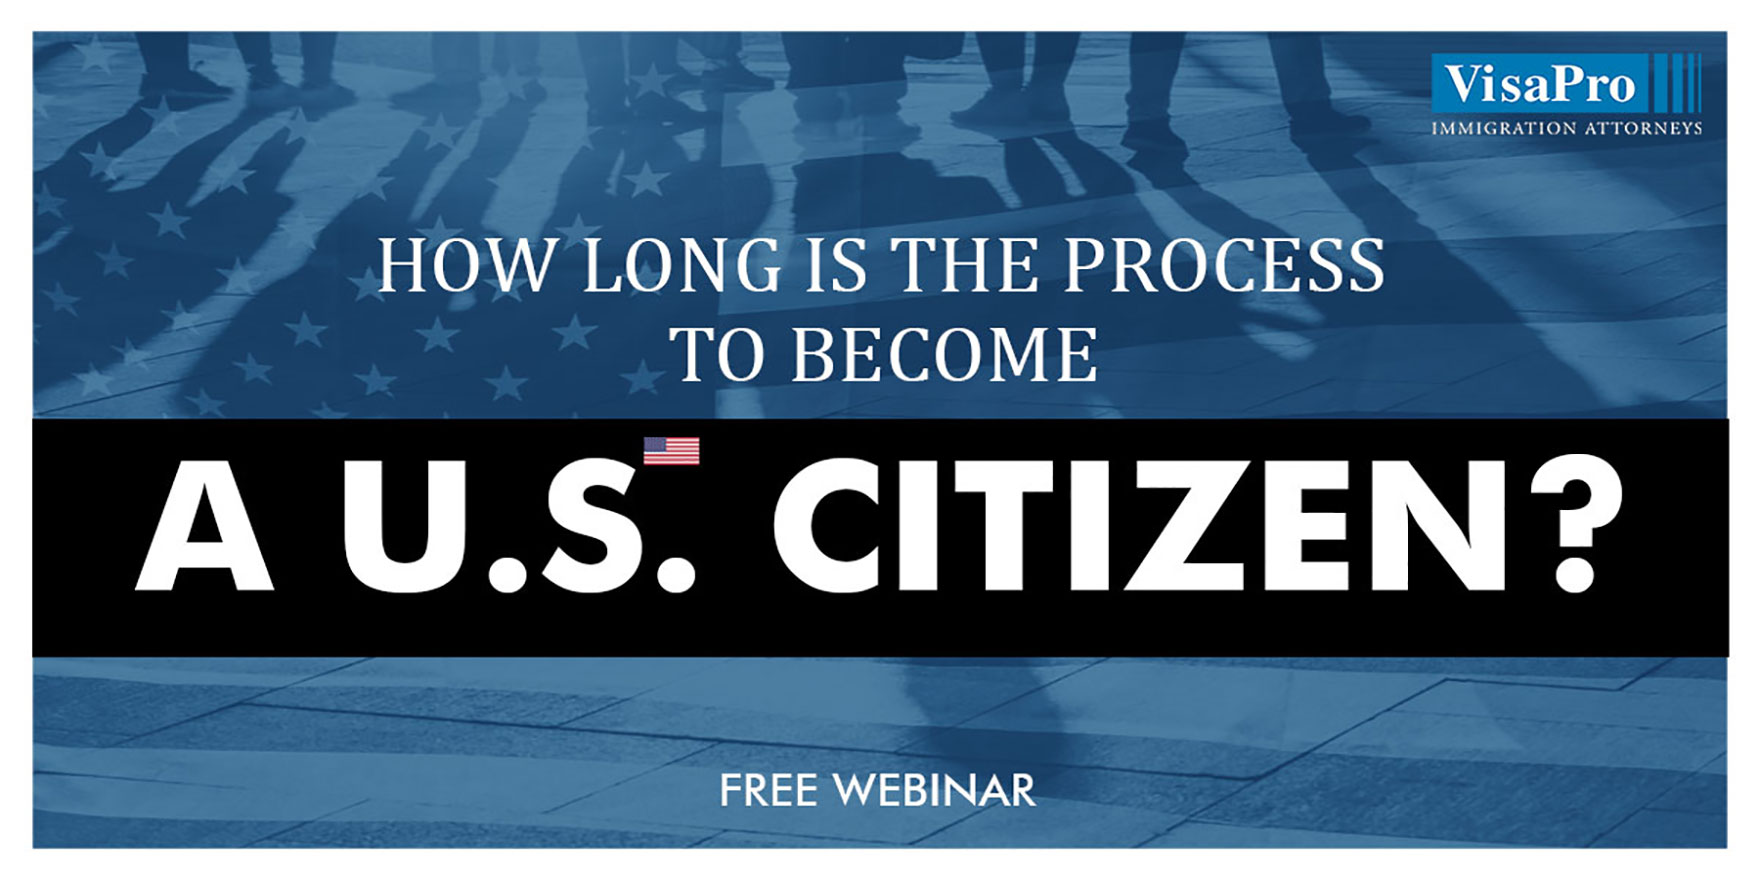 How Long Is The Process To Become A U.S. Citizen?, Boston, Massachusetts, United States